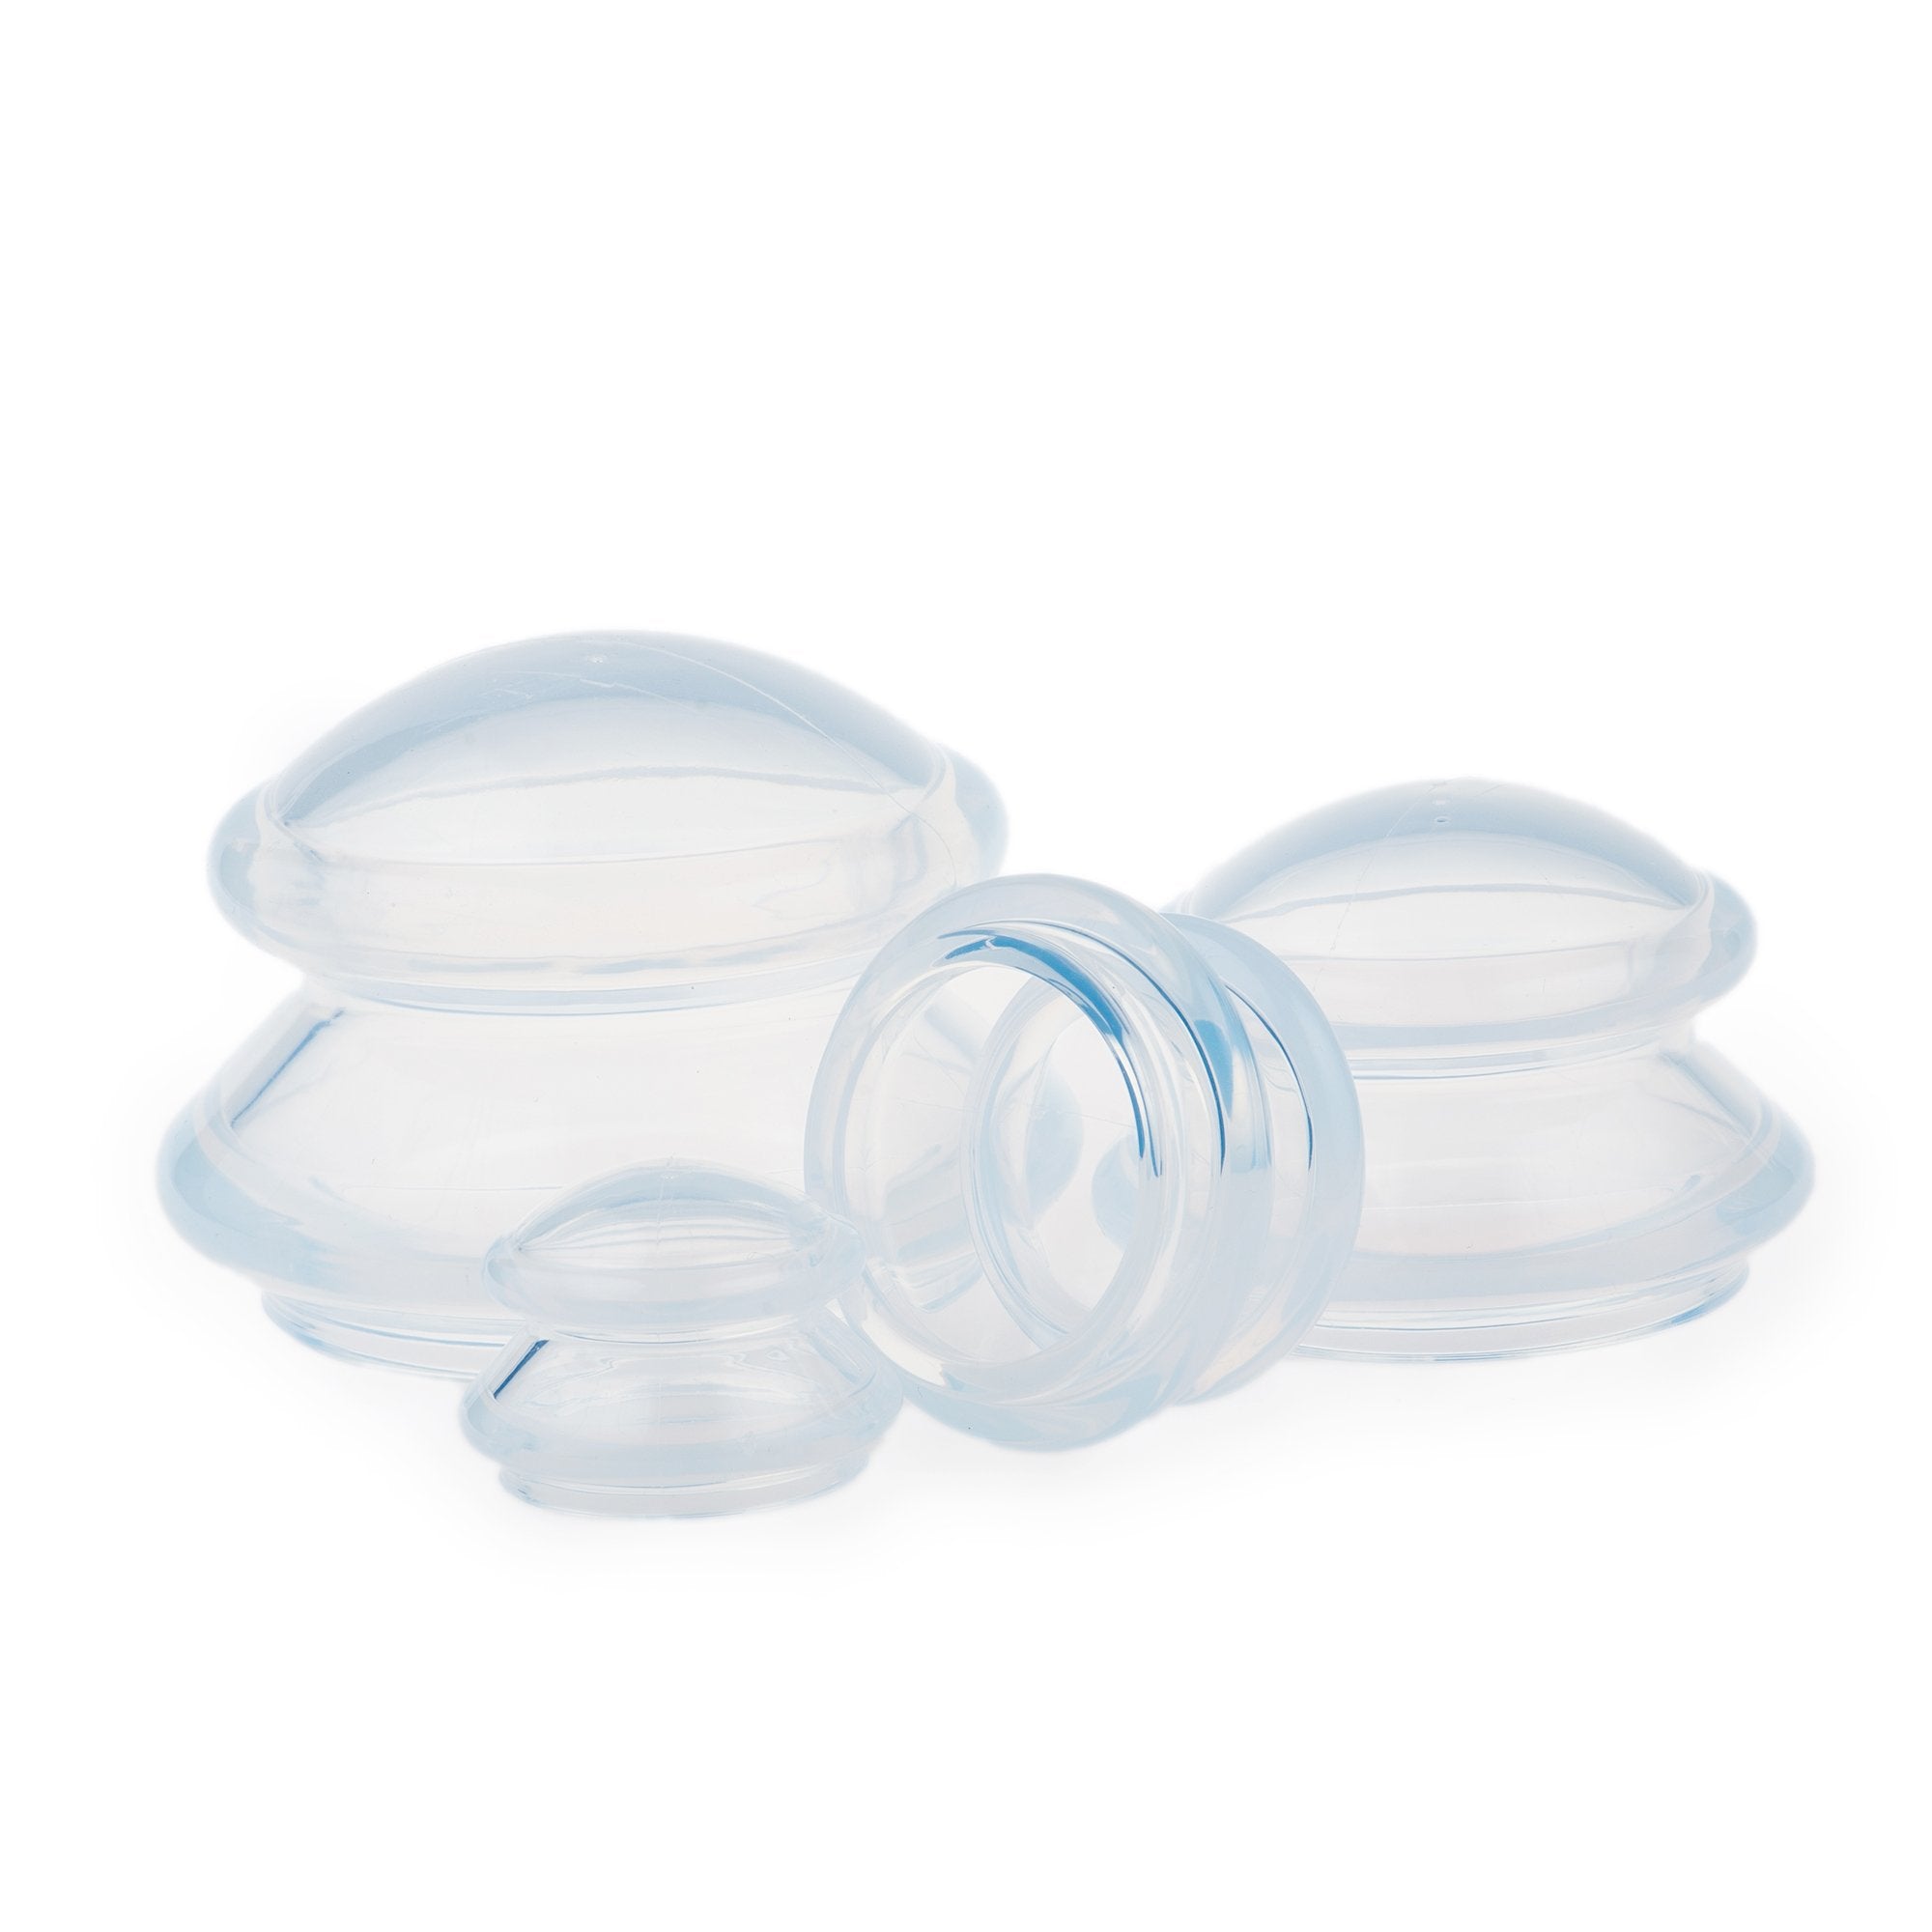 Natural No. 1 silicone cupping set in Canada. Balance Clear Silicone Cupping Set 4 cups